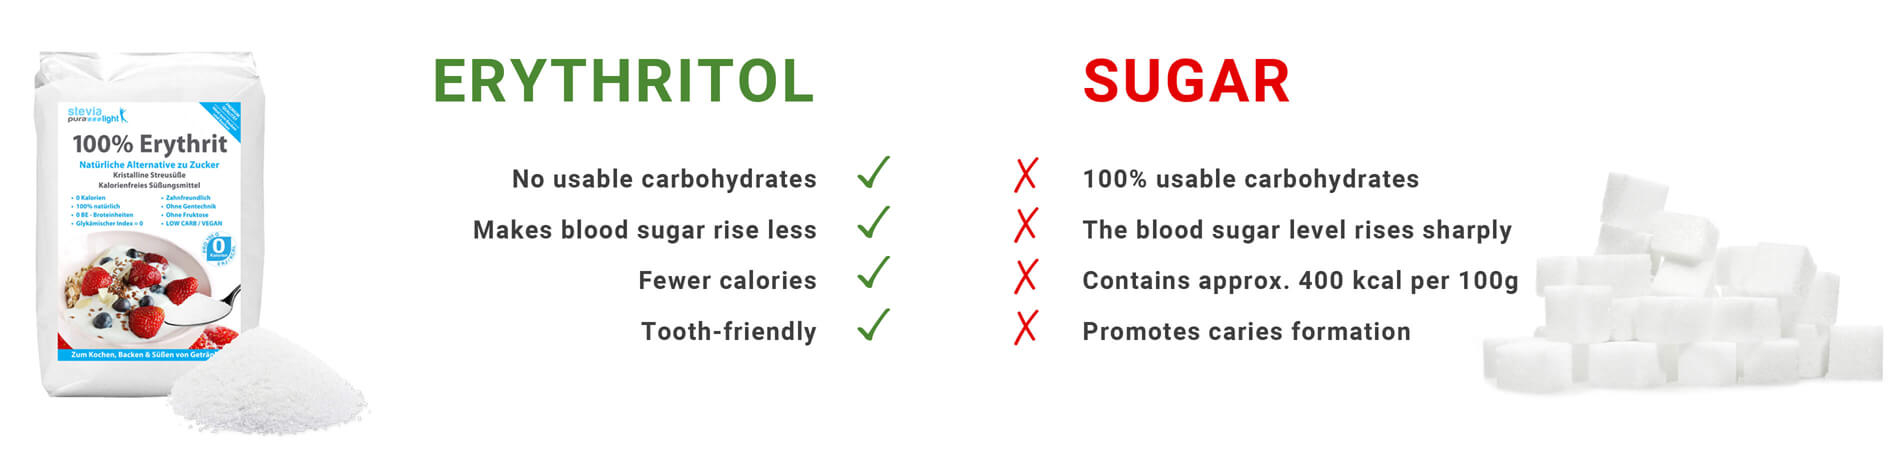 Erythritol is a sugar substitute that tastes like sugar but contains no calories.